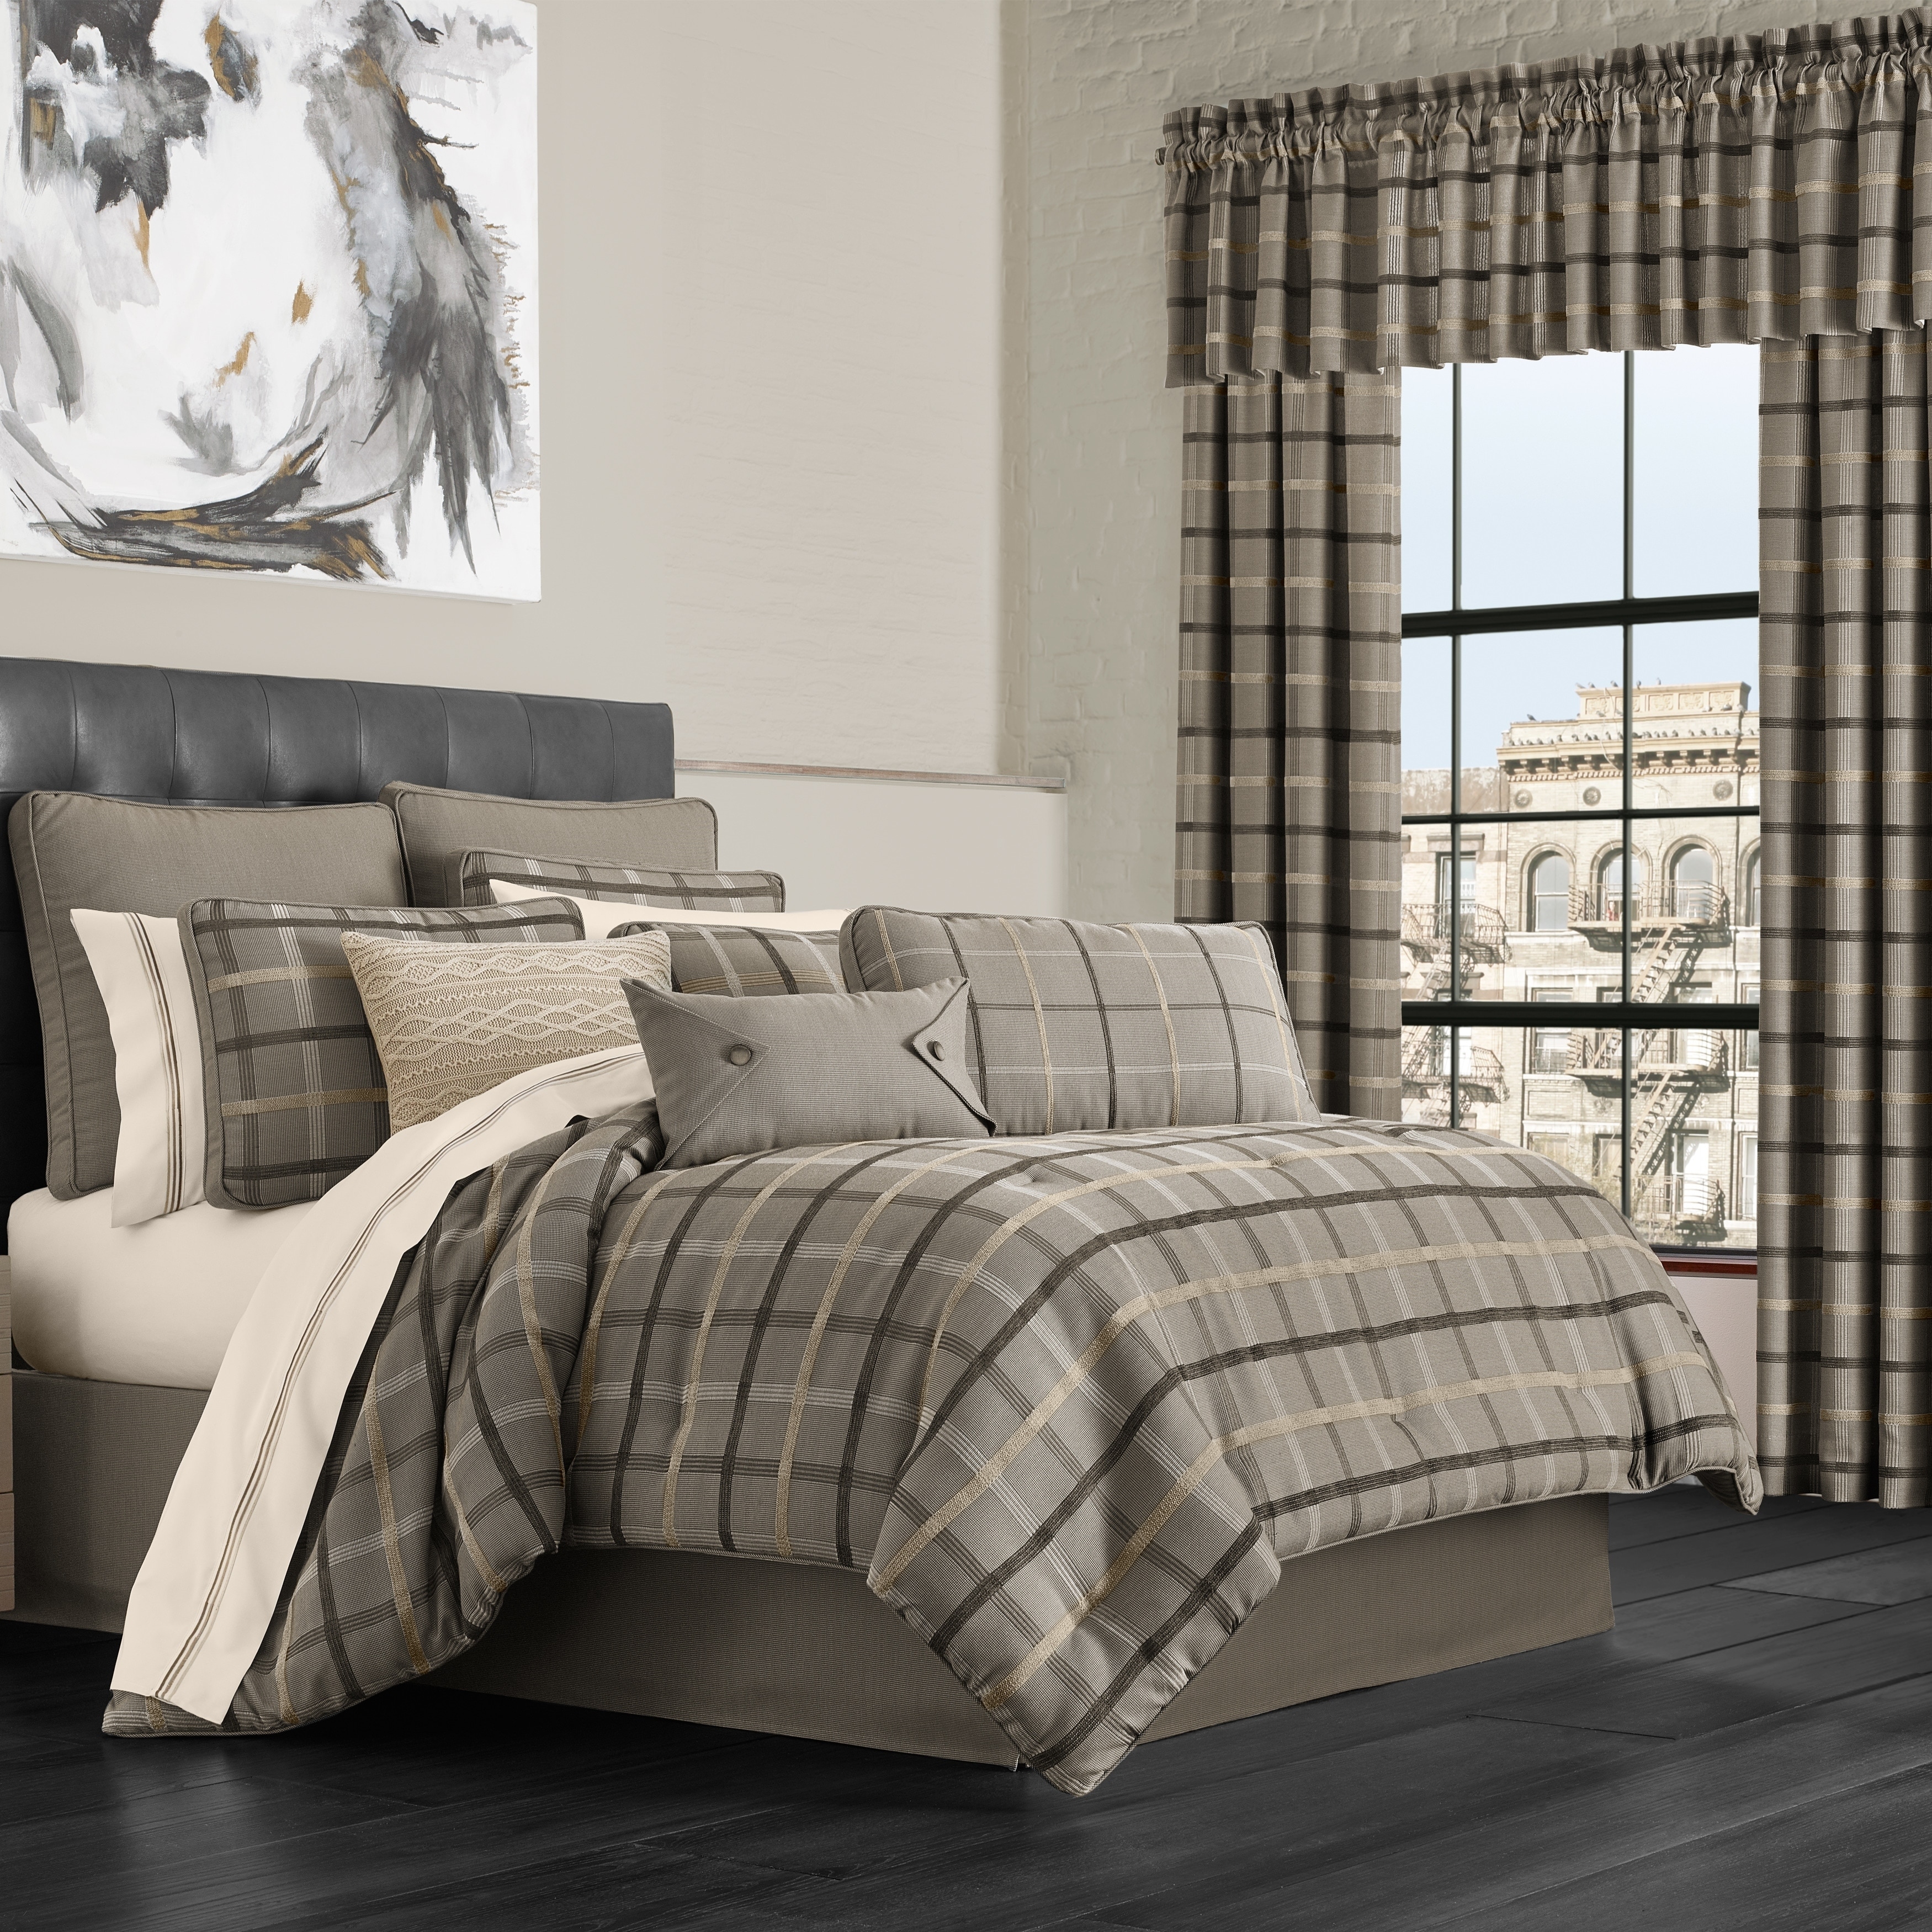 Browning 3D Buckmark Comforter Set With Sheets and Curtain Set FREE SHIPPING